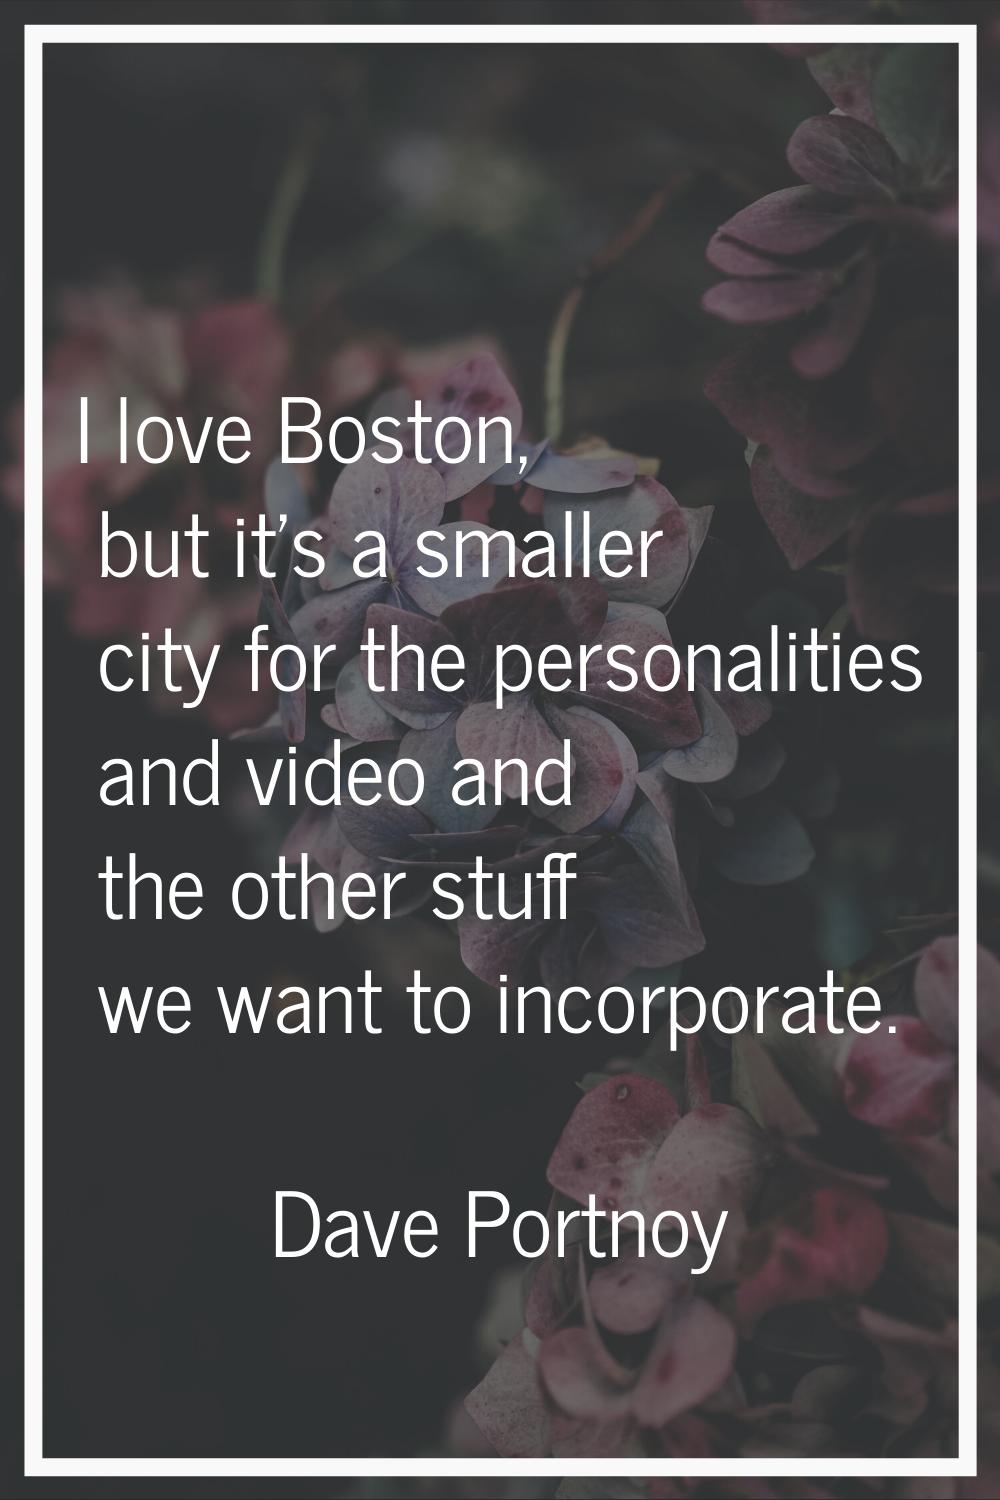 I love Boston, but it's a smaller city for the personalities and video and the other stuff we want 